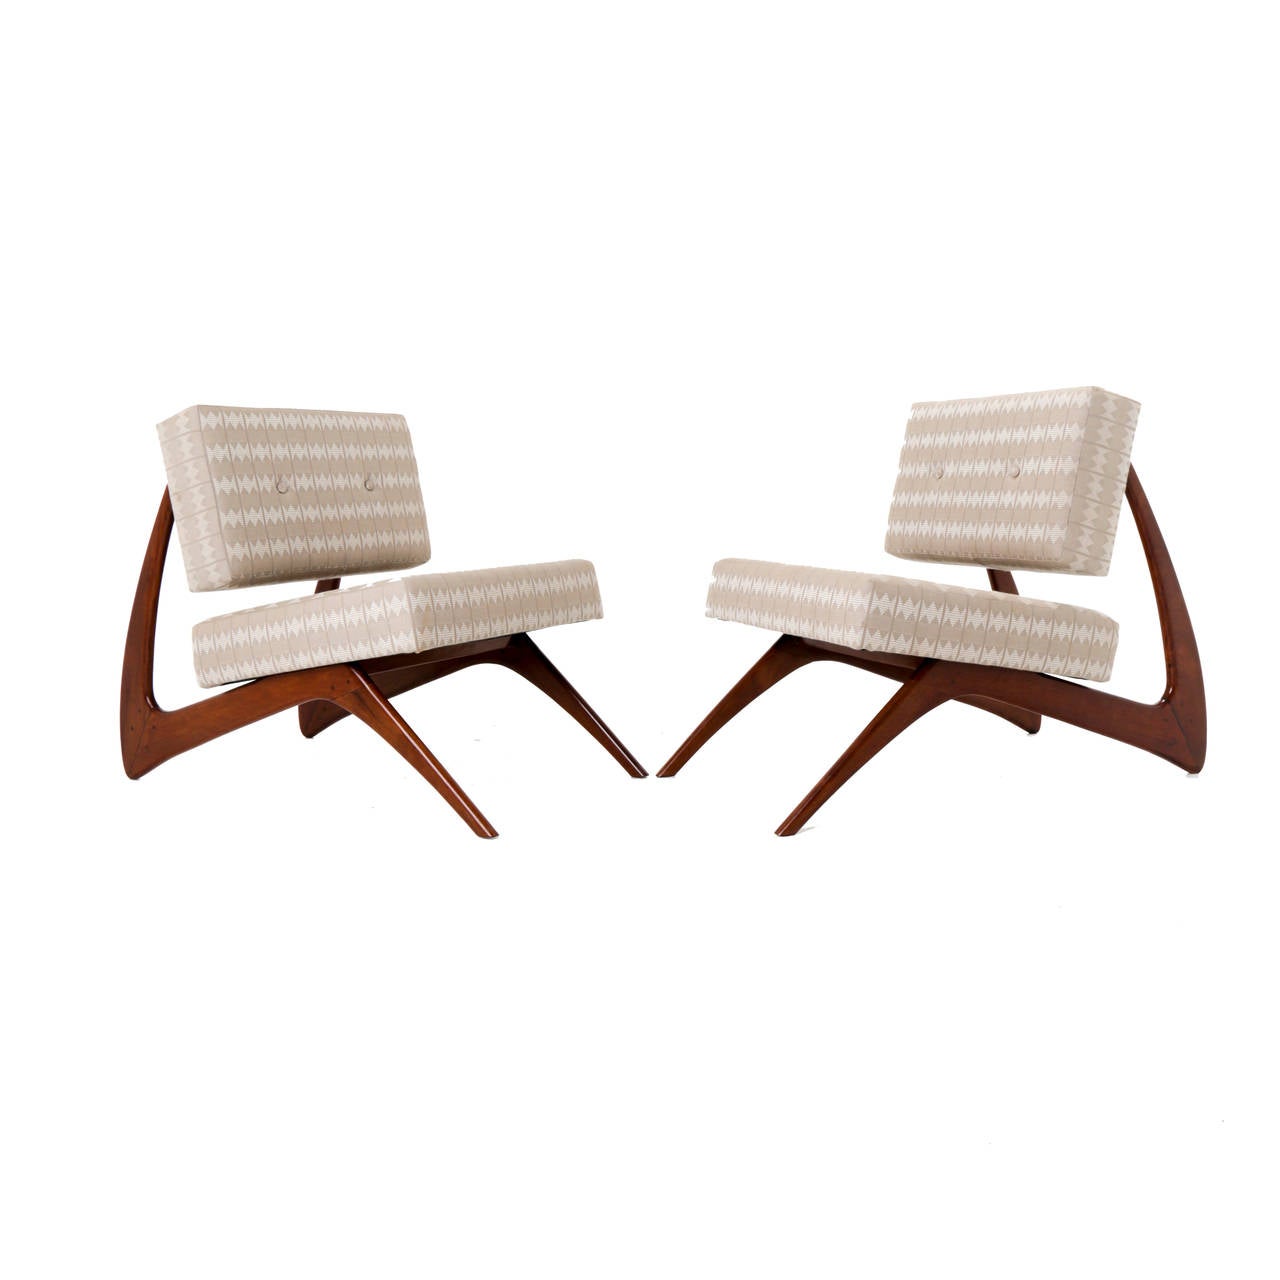 Pair of unique chairs with striking sculptural Caviuna bases and floating button backs. 

Many pieces are stored in our warehouse, so please click on CONTACT DEALER under our logo below to find out if the pieces you are interested in seeing are on